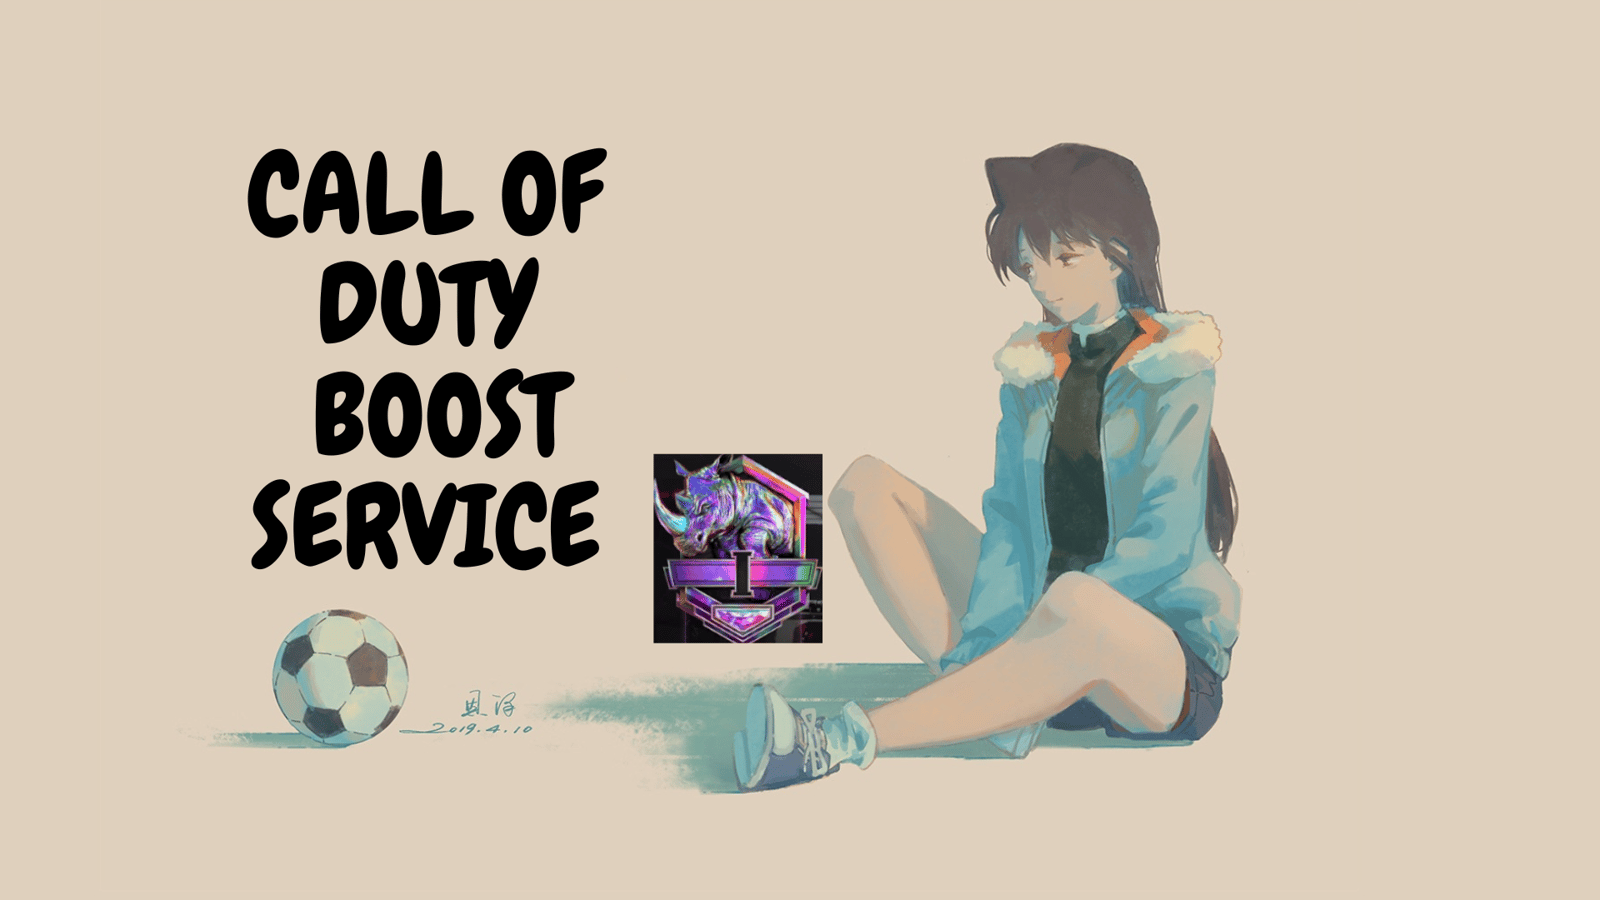 Call of Duty Ranked Boost Service (Fortune's Ranked)